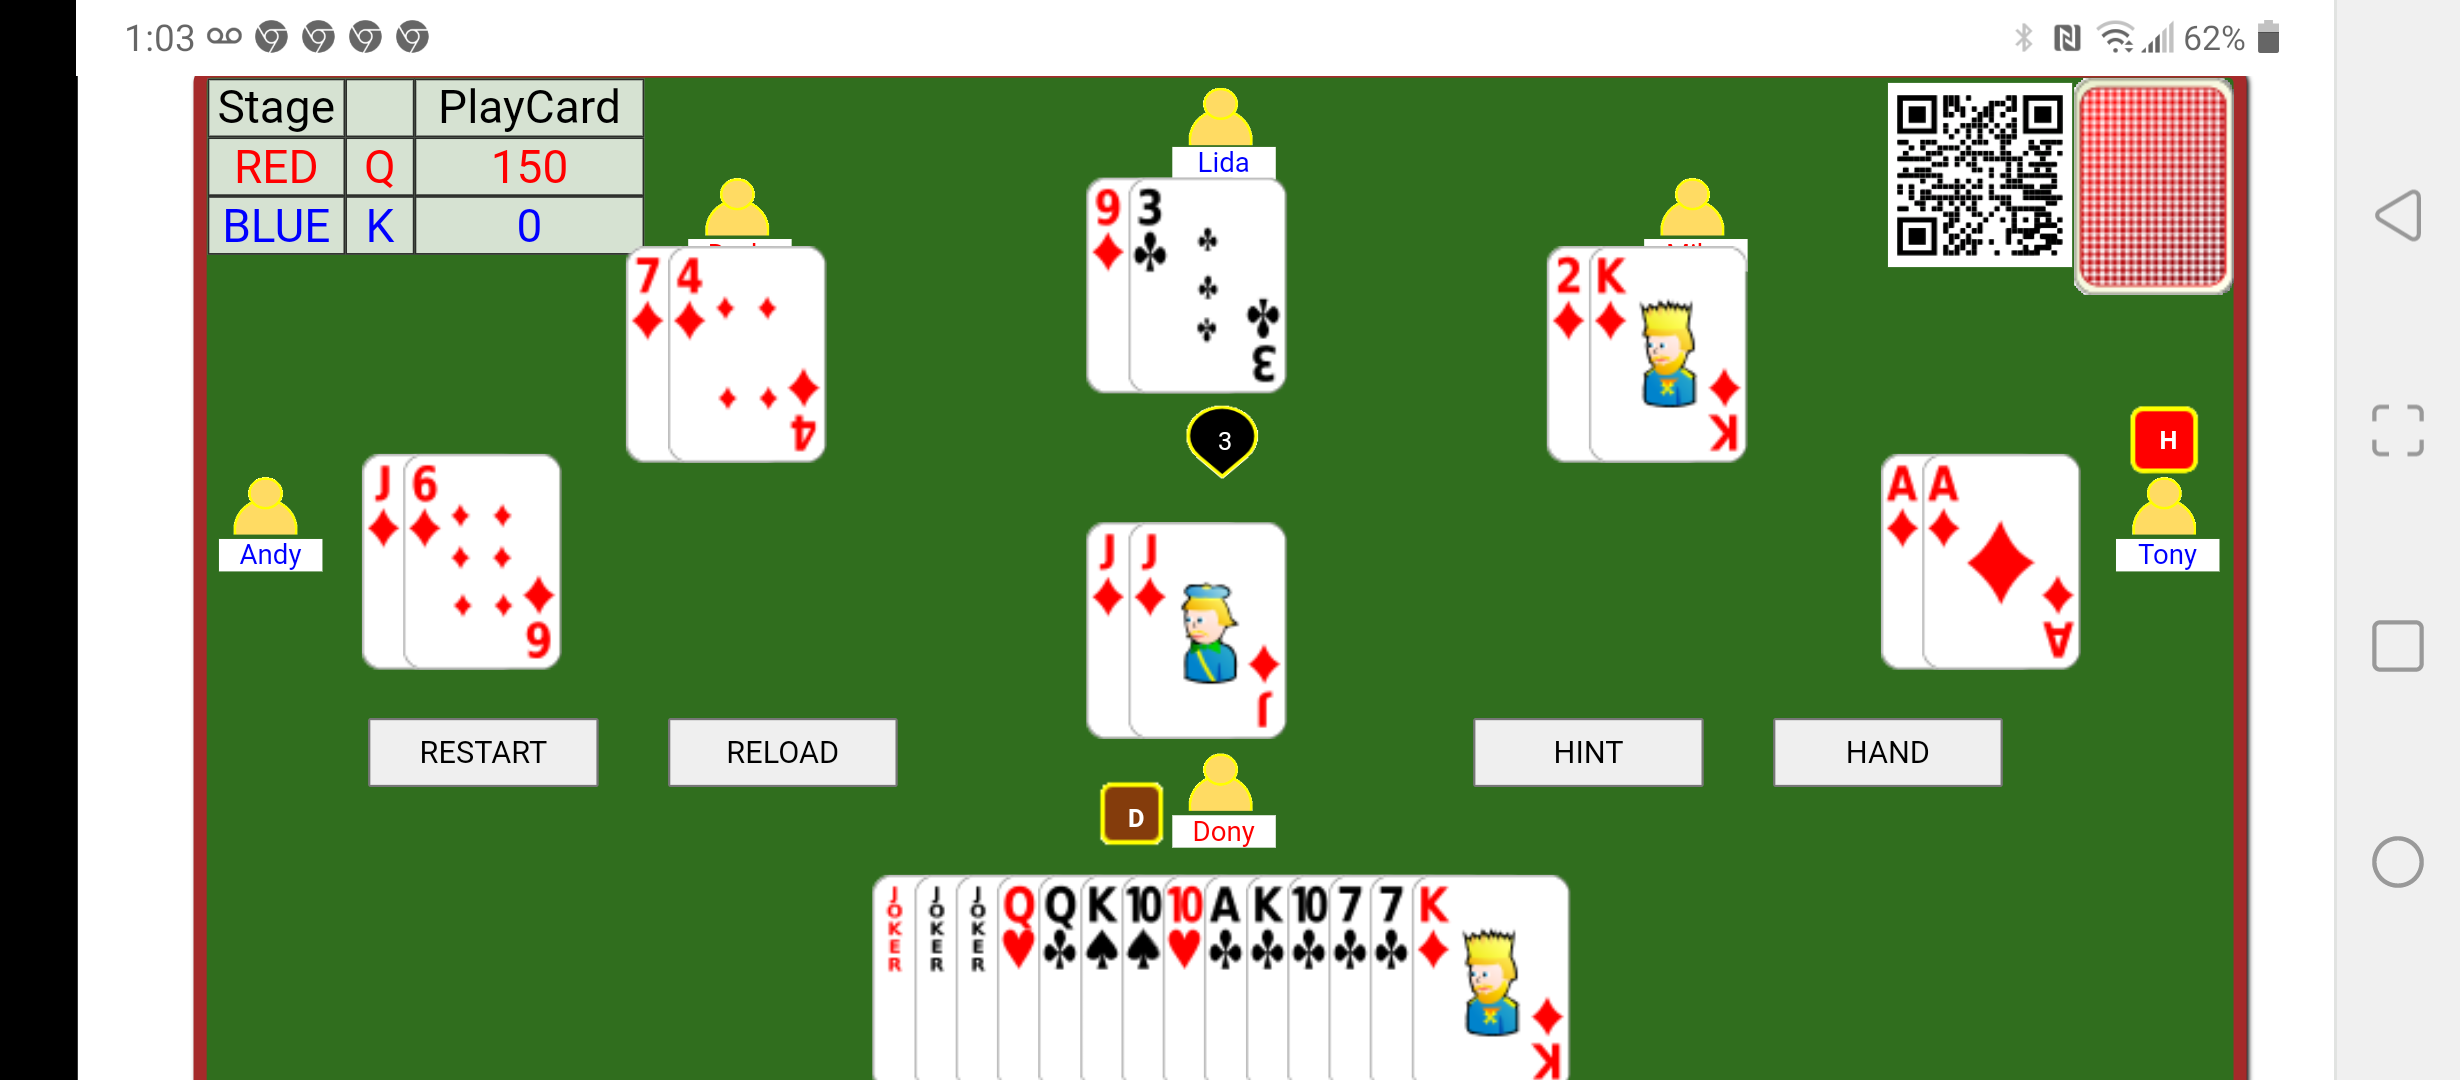 html5 tractor card game Screenshot_20220126-010322.png